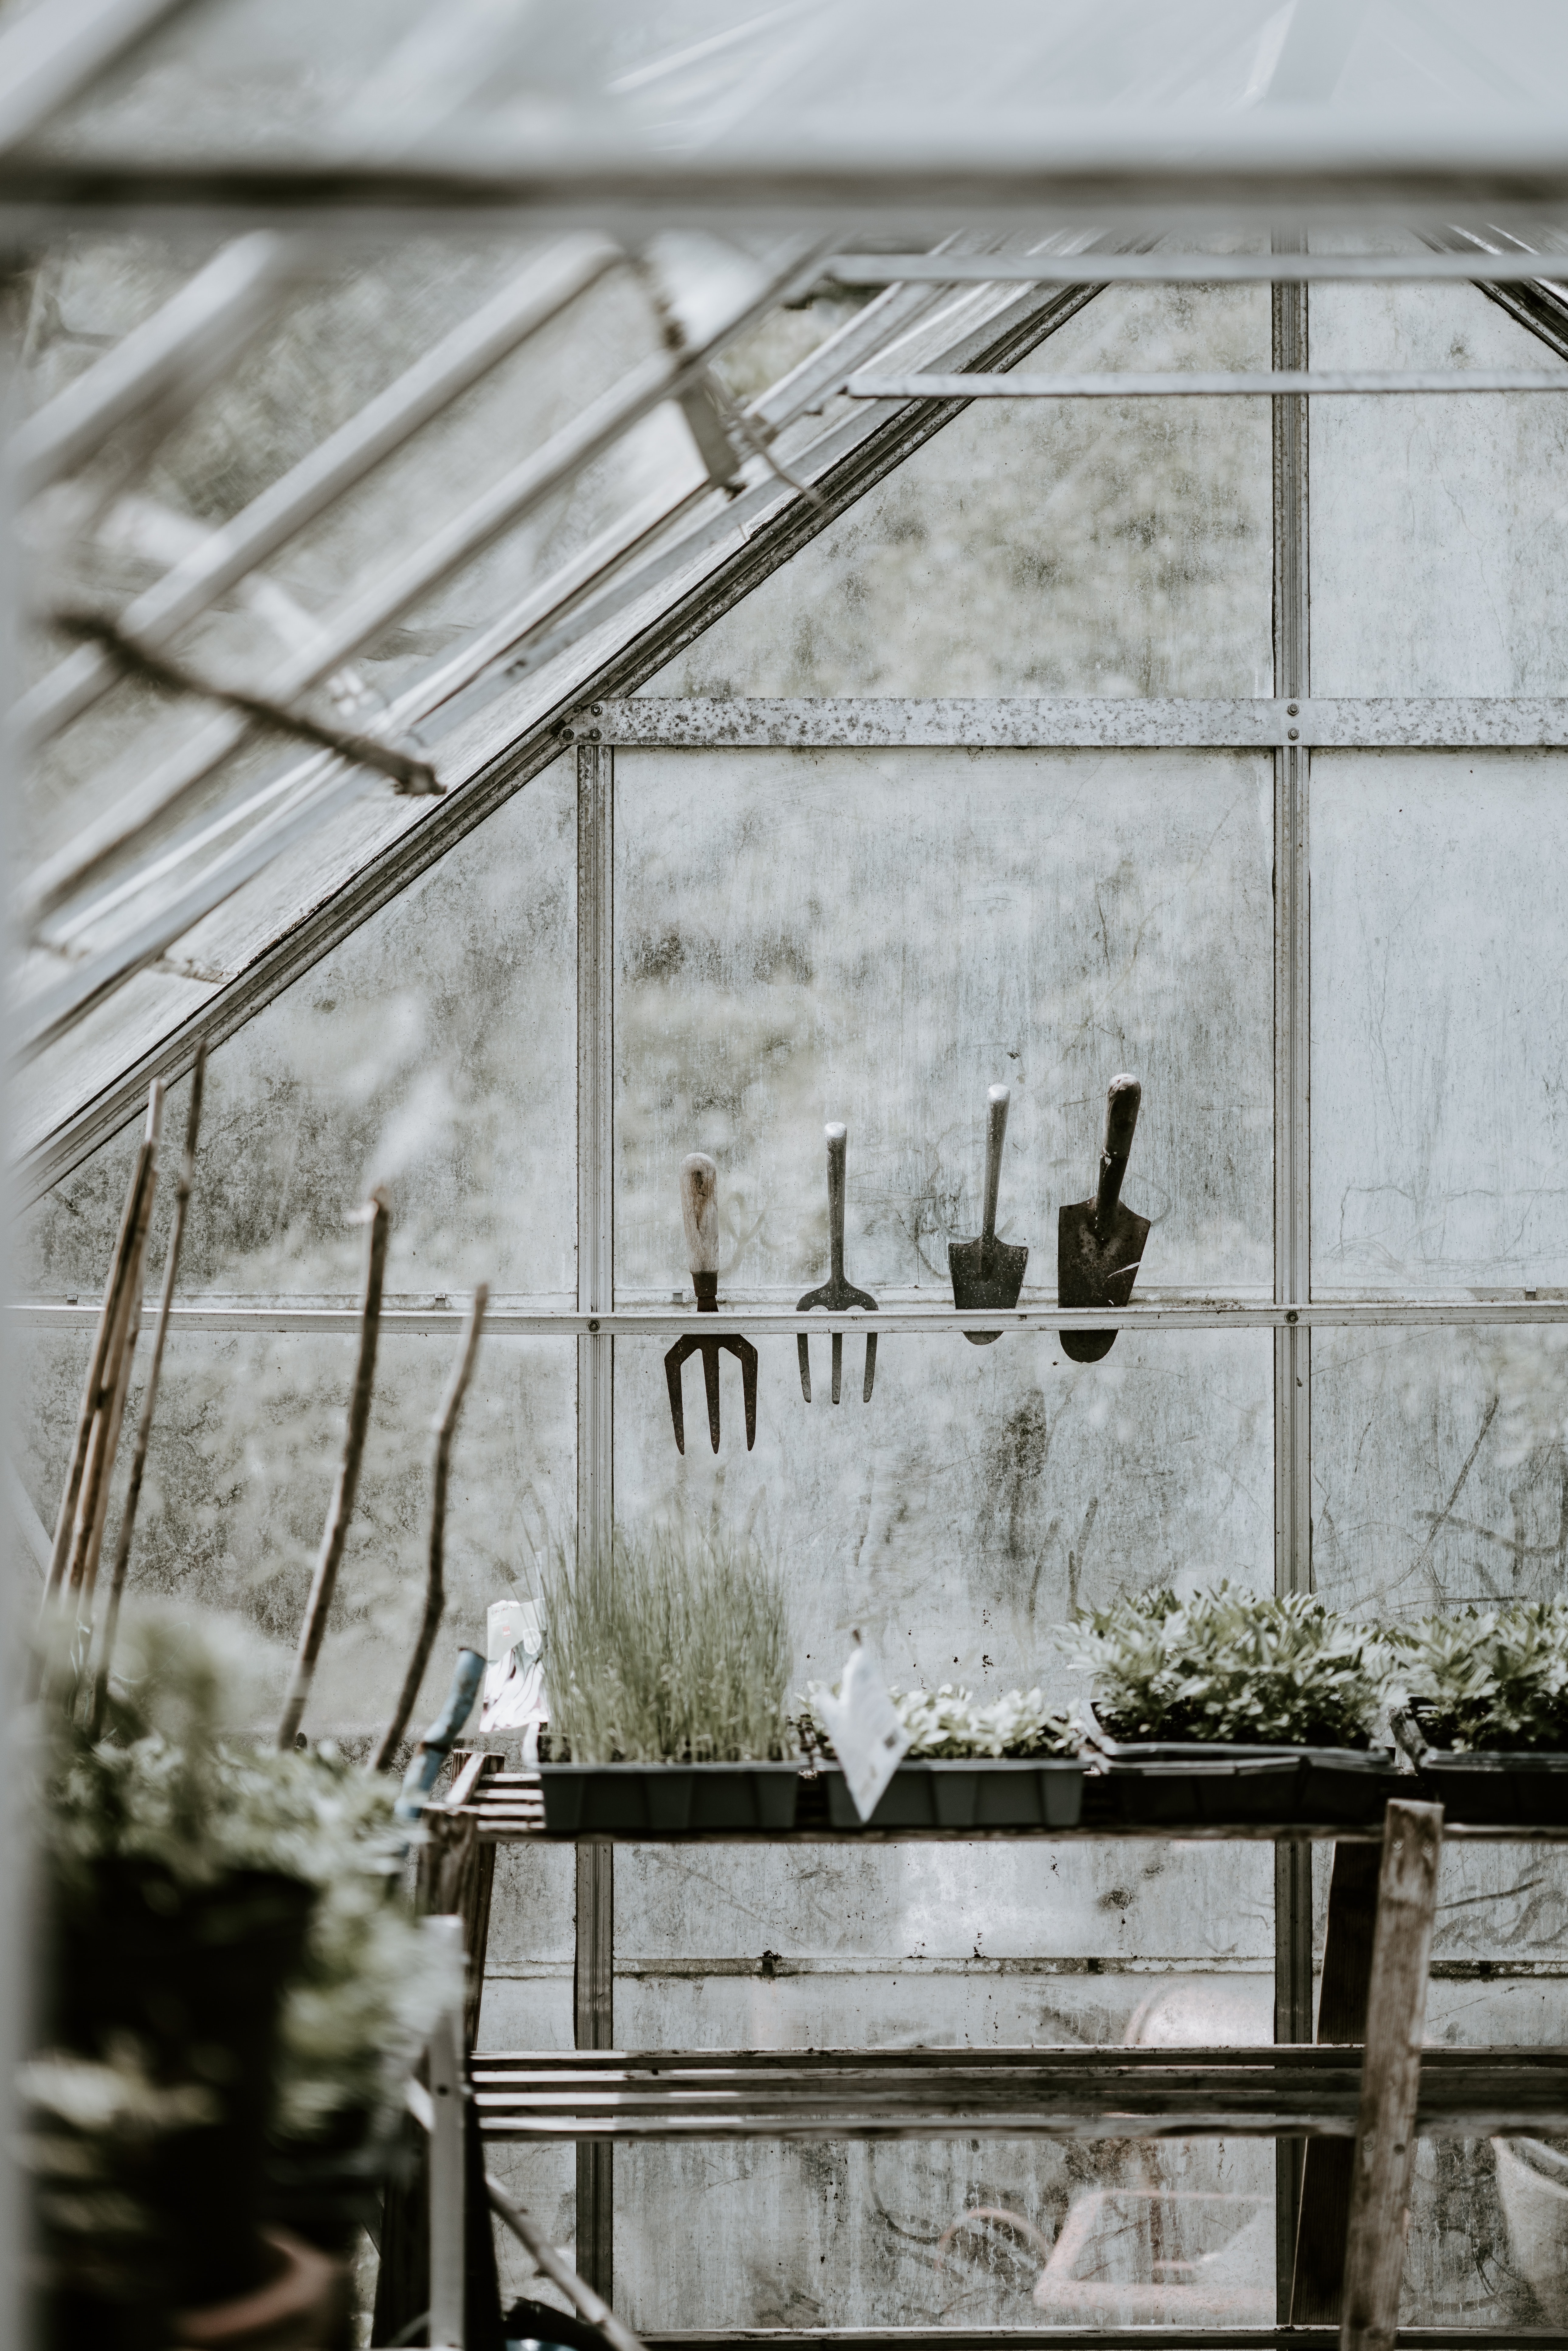 How to Pick the Right Greenhouse for Your Garden